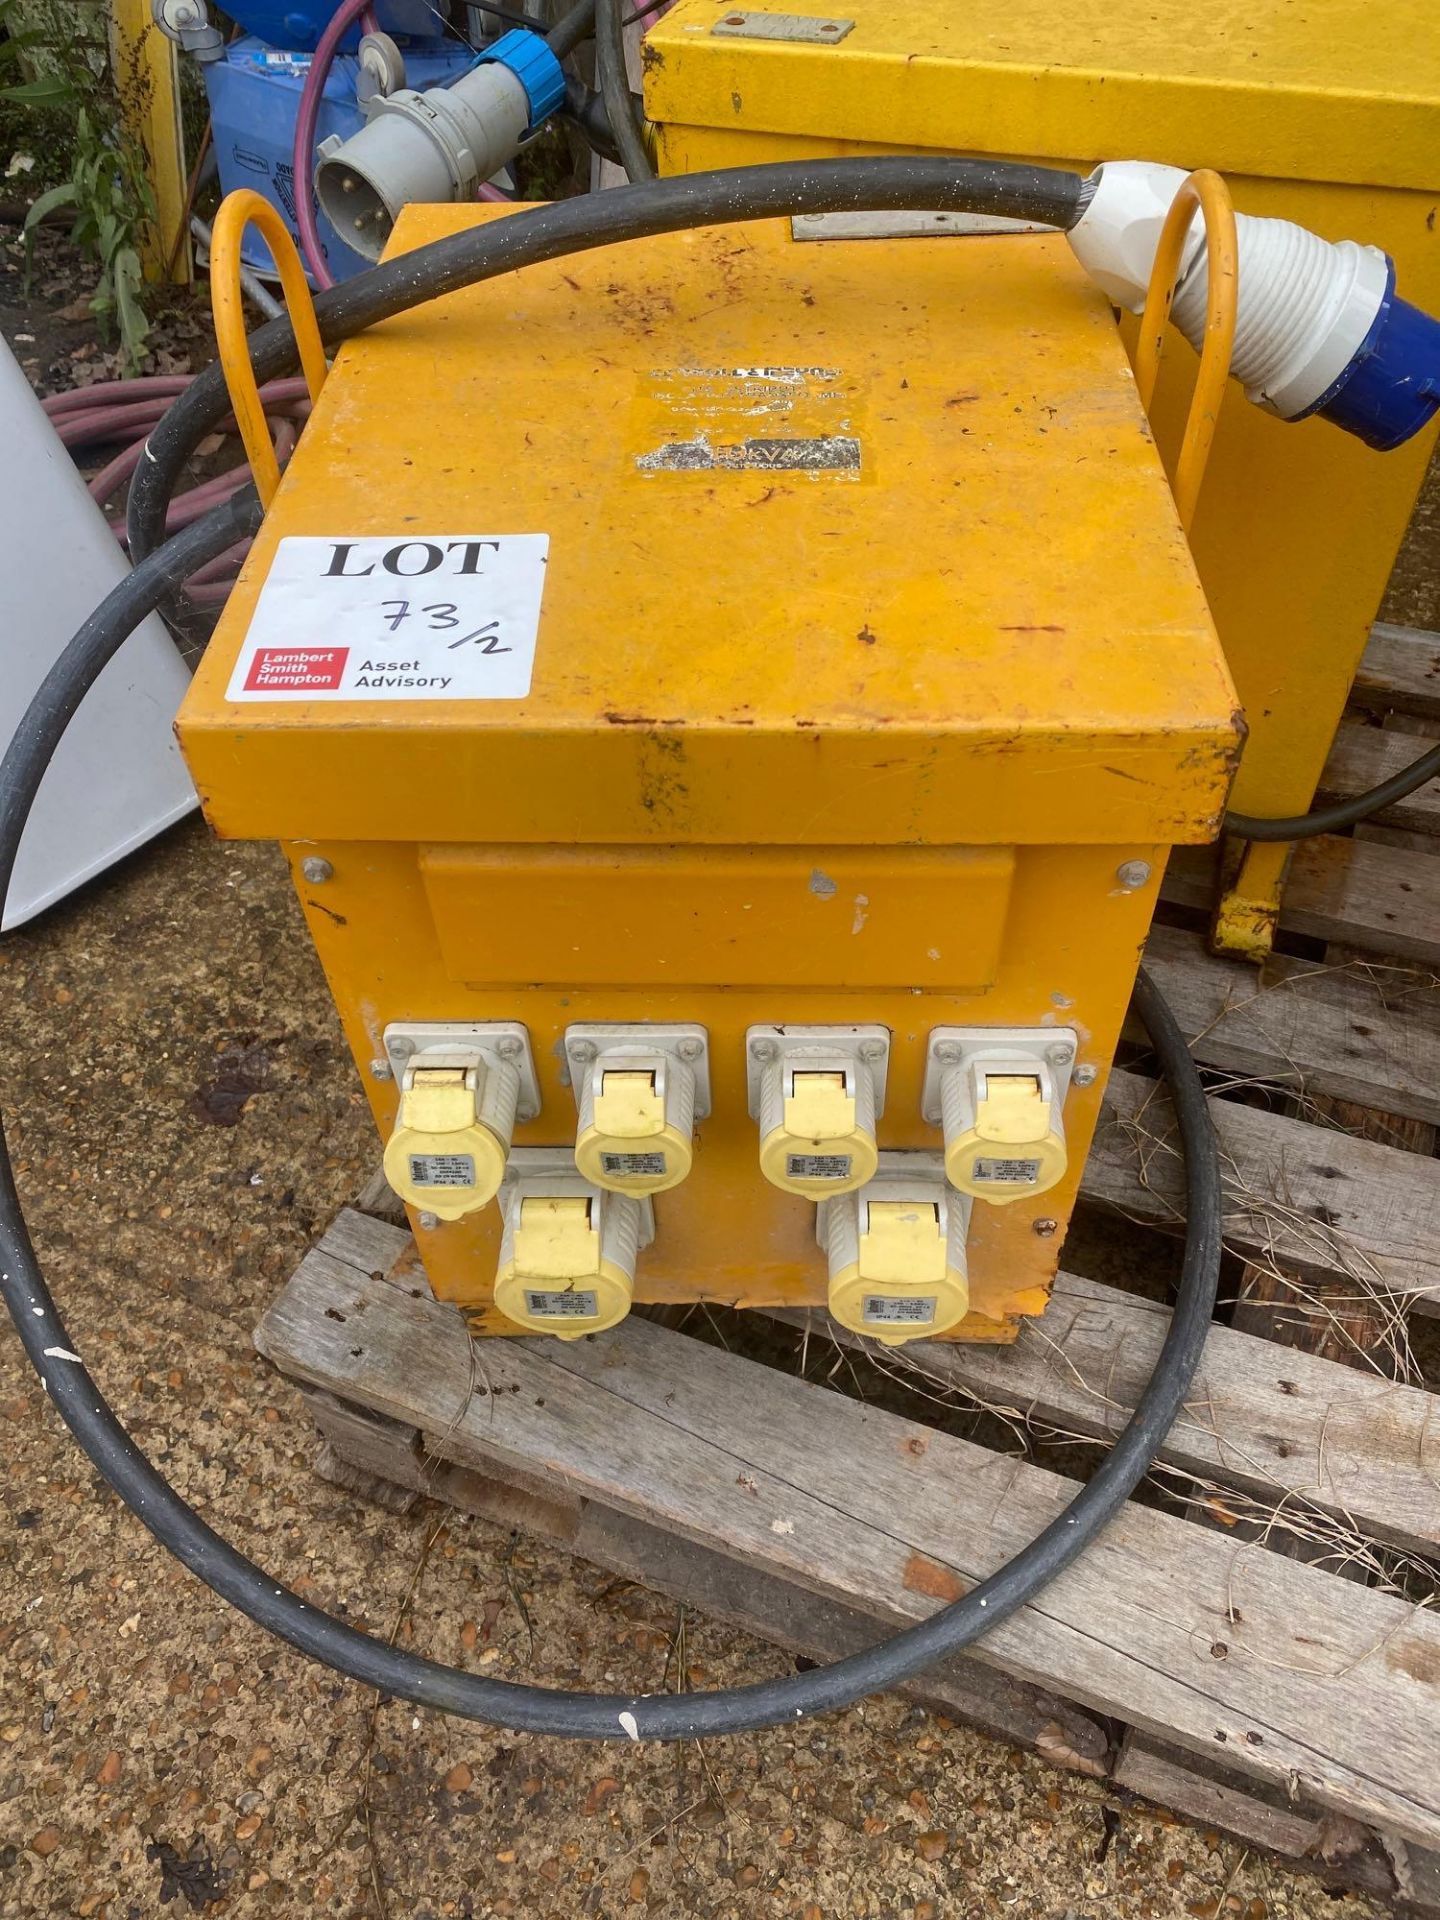 2 various 10kva site transformers with push plug outlets, 230v supply